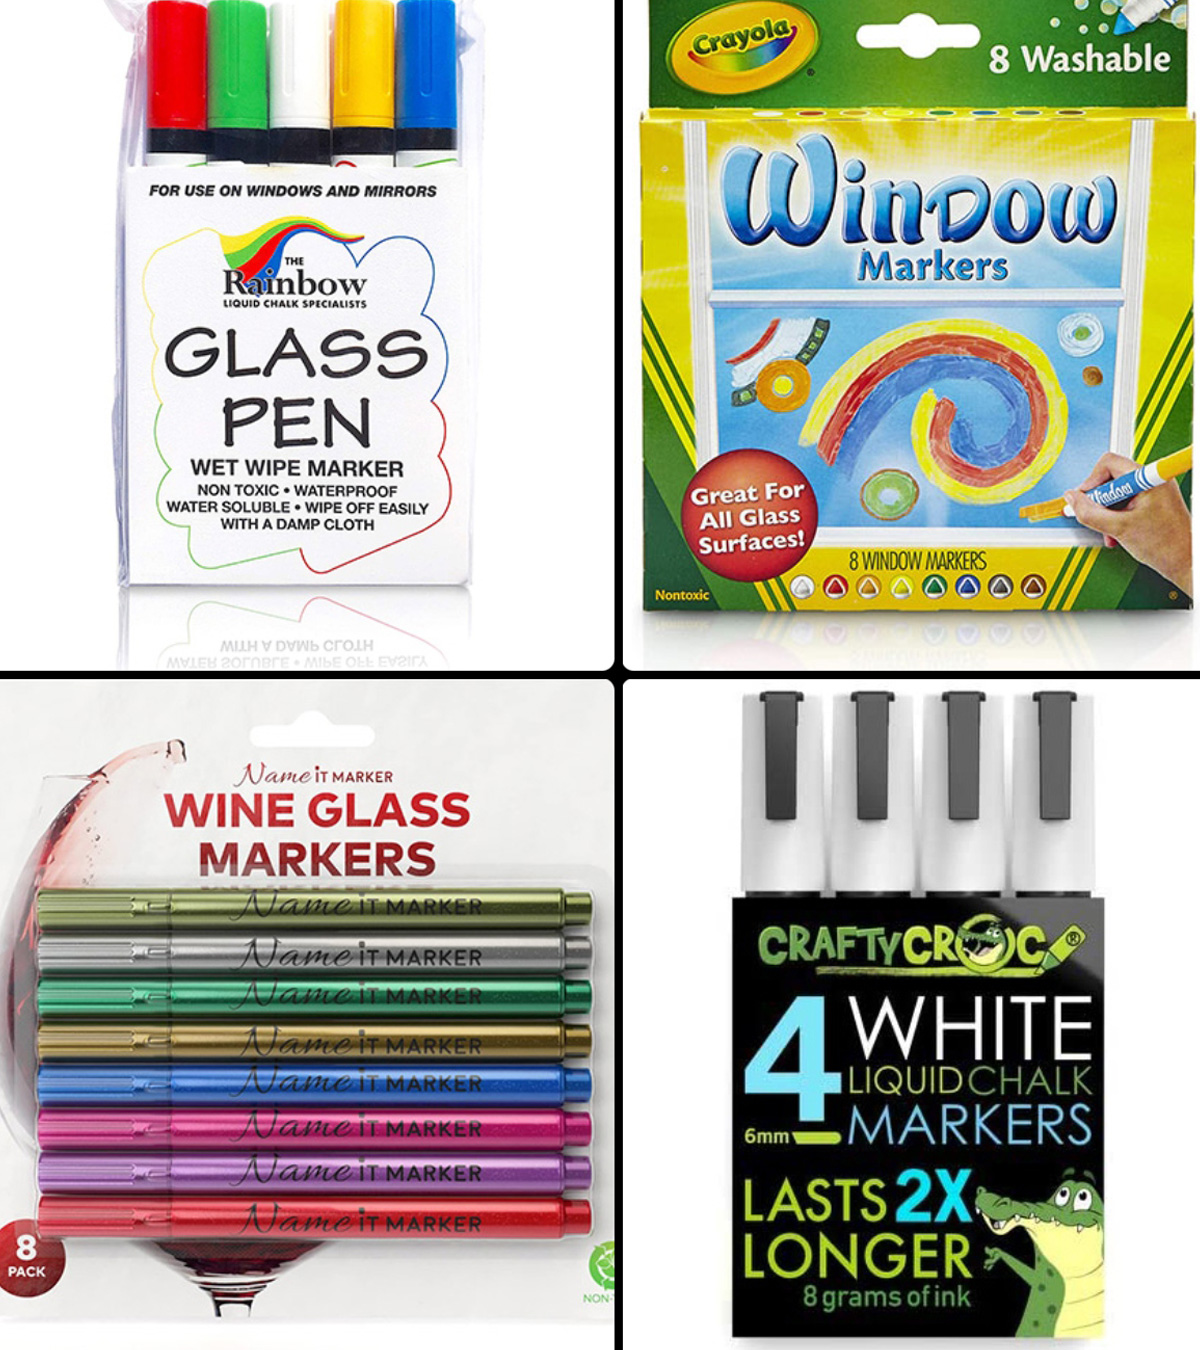 https://www.momjunction.com/wp-content/uploads/2021/02/Best-Markers-To-Write-On-Glass.jpg